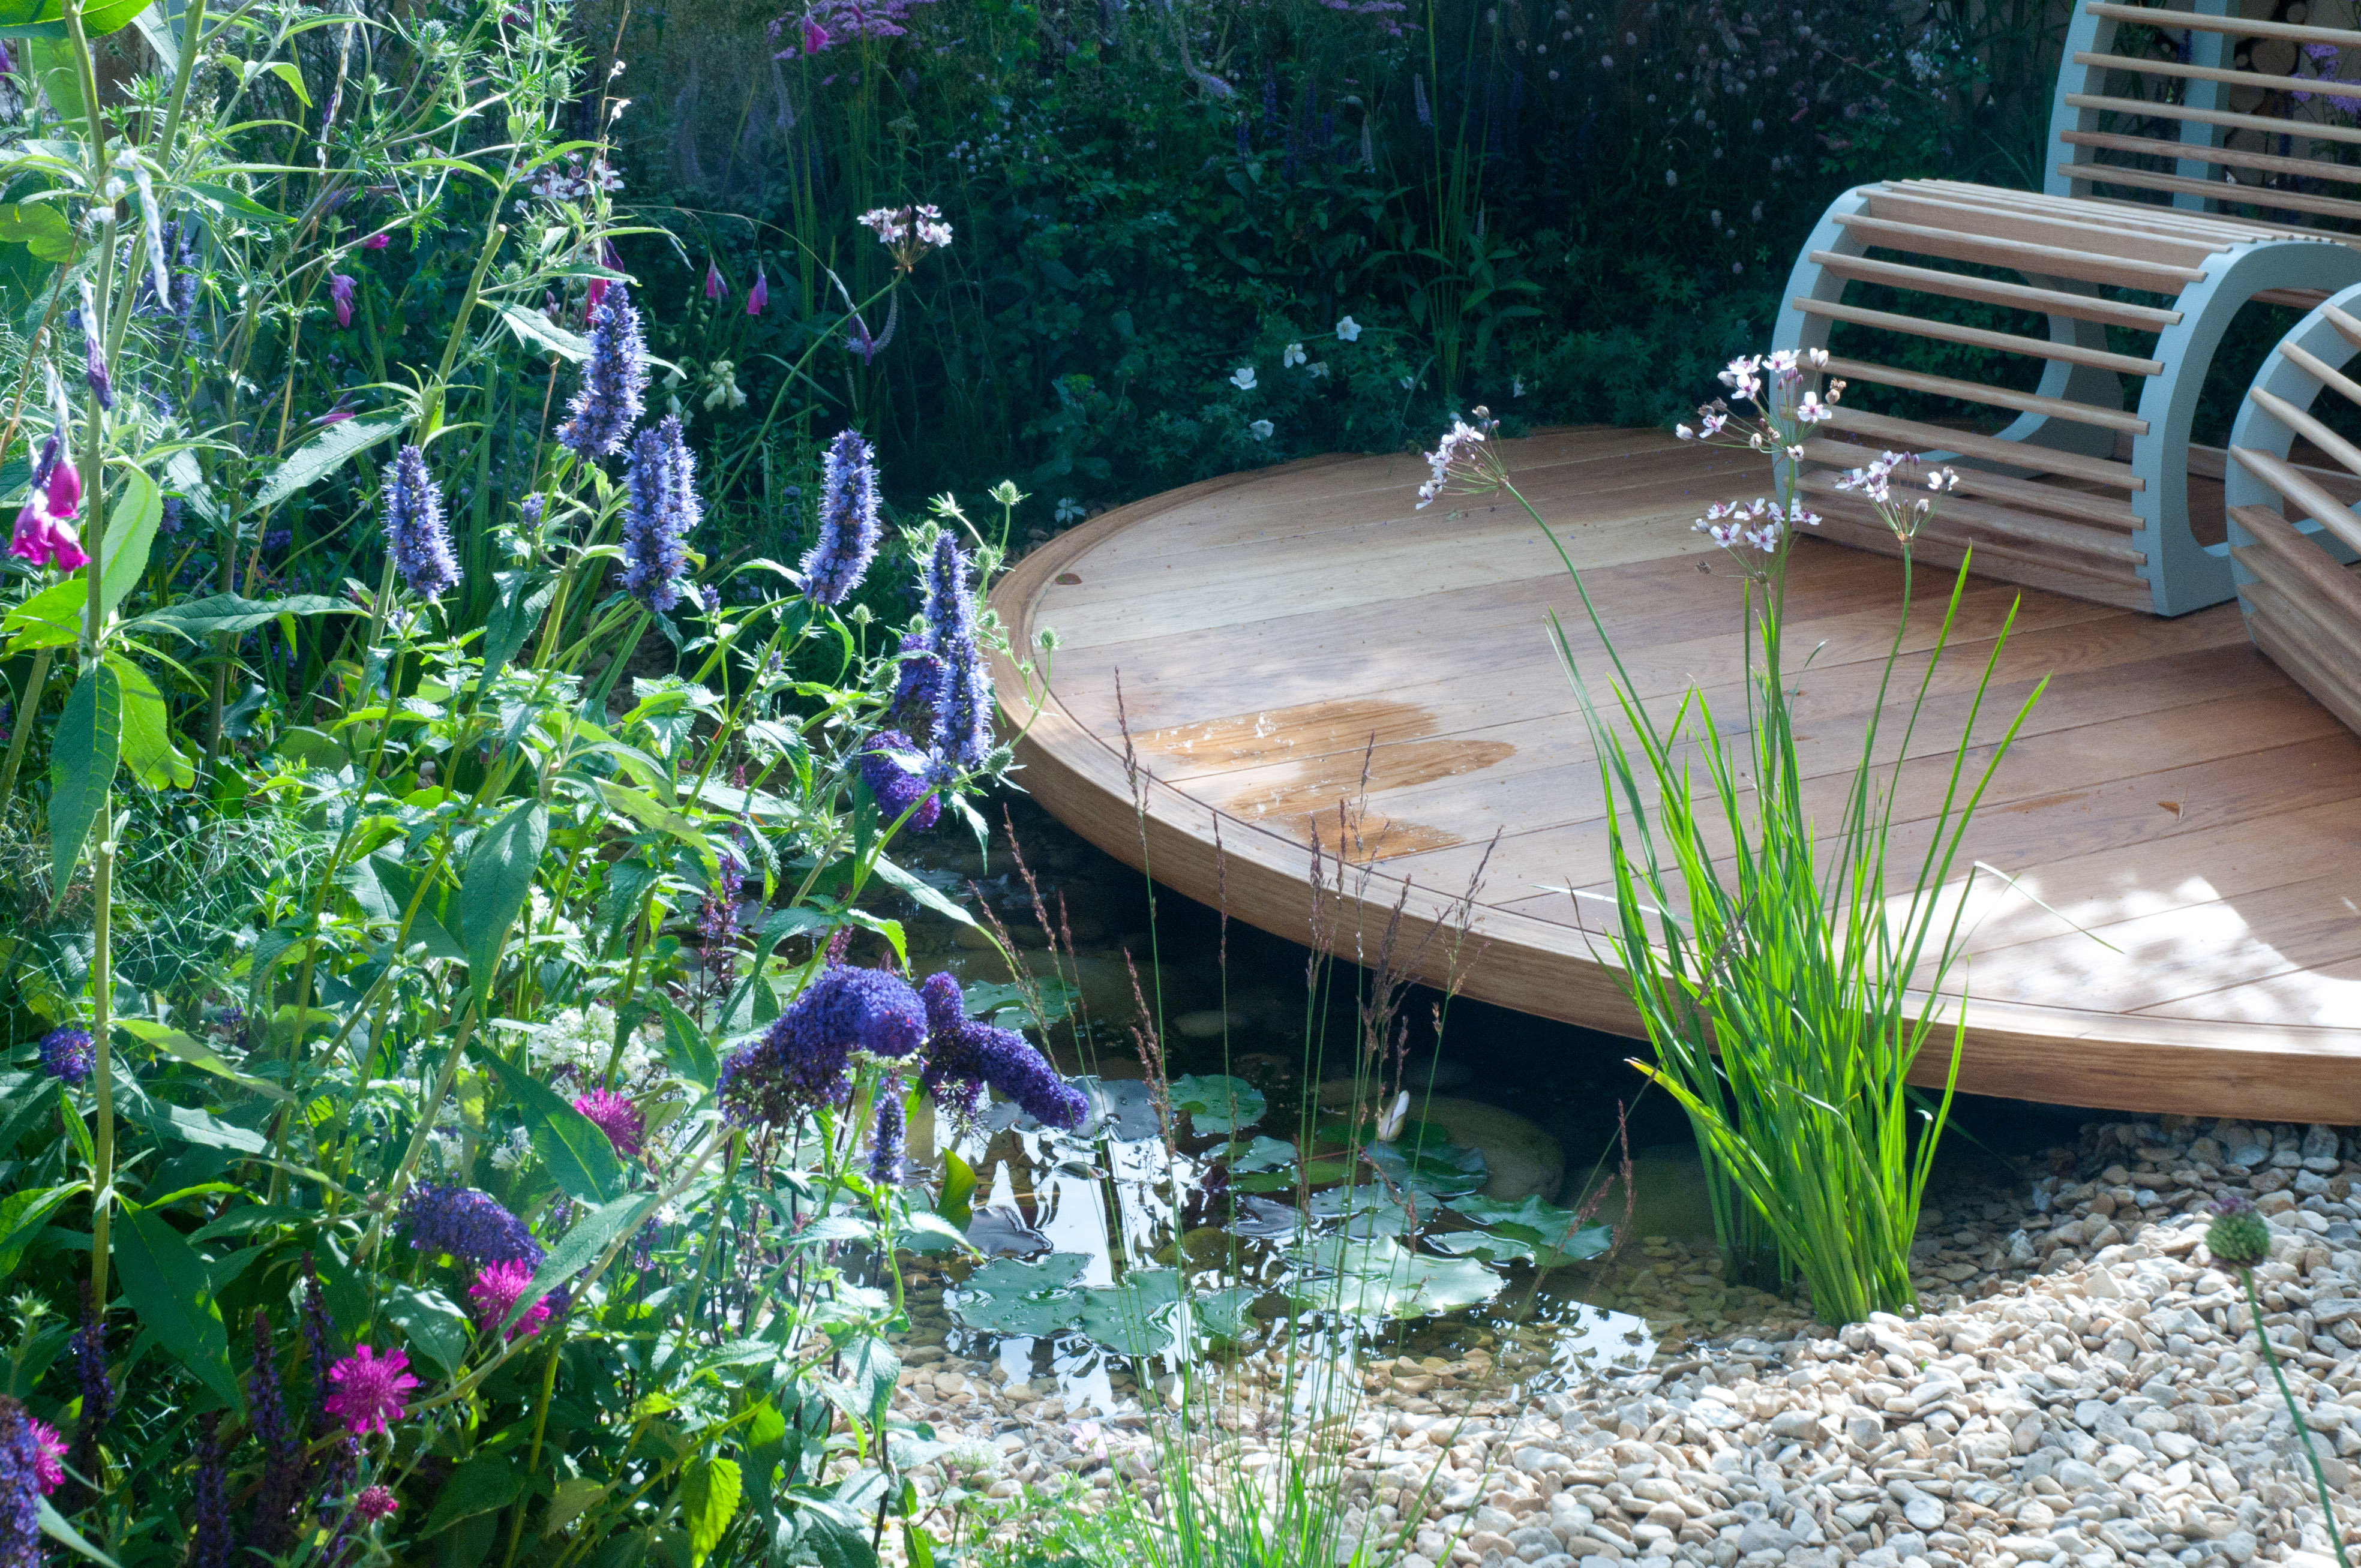  garden by charlottemurrell.co.uk with pond artfully sliced into design